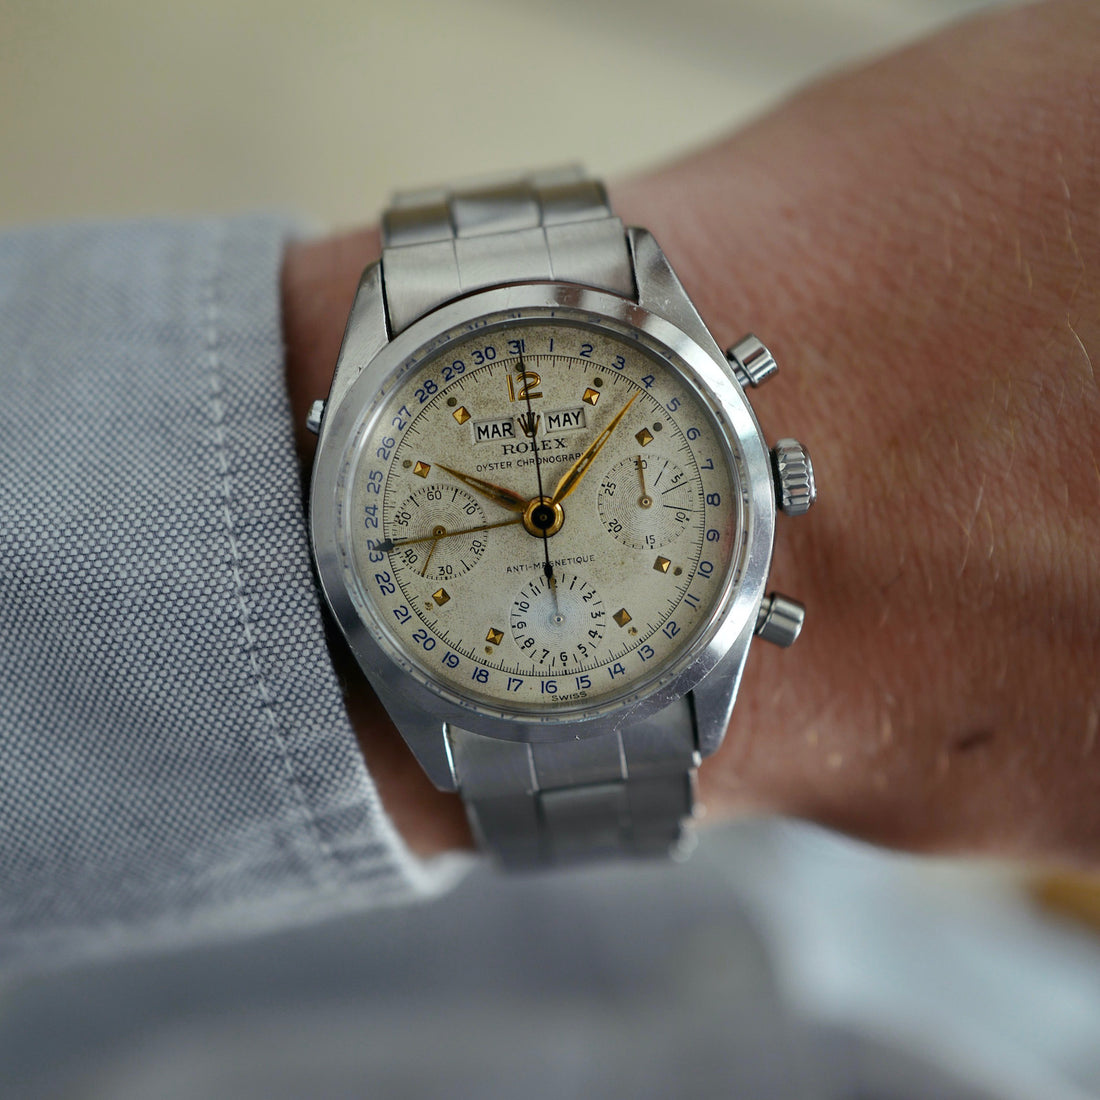 Rolex Oyster Chronograph Jean Claude Killy Watch, Ref. 6236